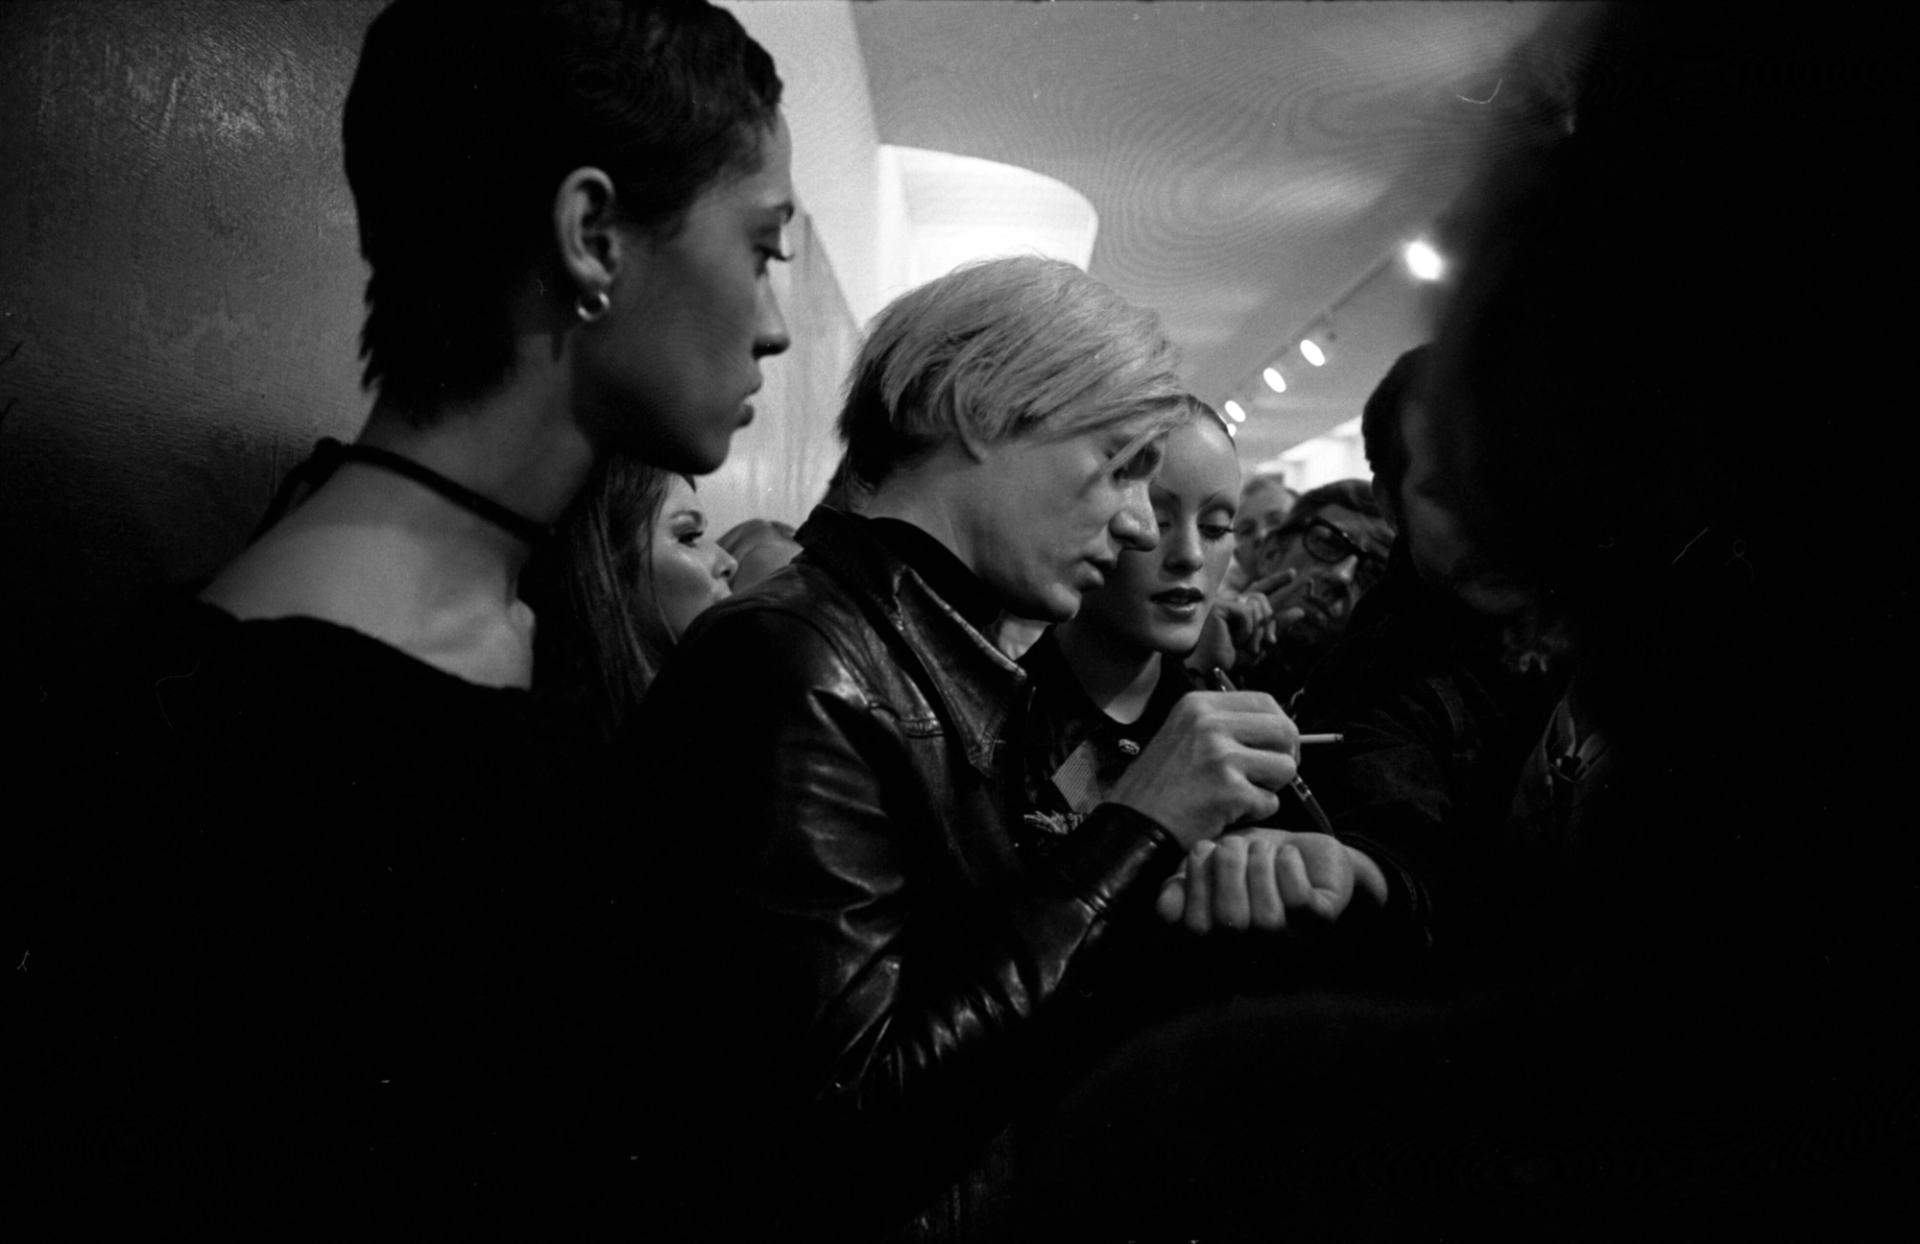 A monochrome image of Andy Warhol, surrounded by people, signing autographs and smoking a cigarette. He is wearing a black leather jacket.